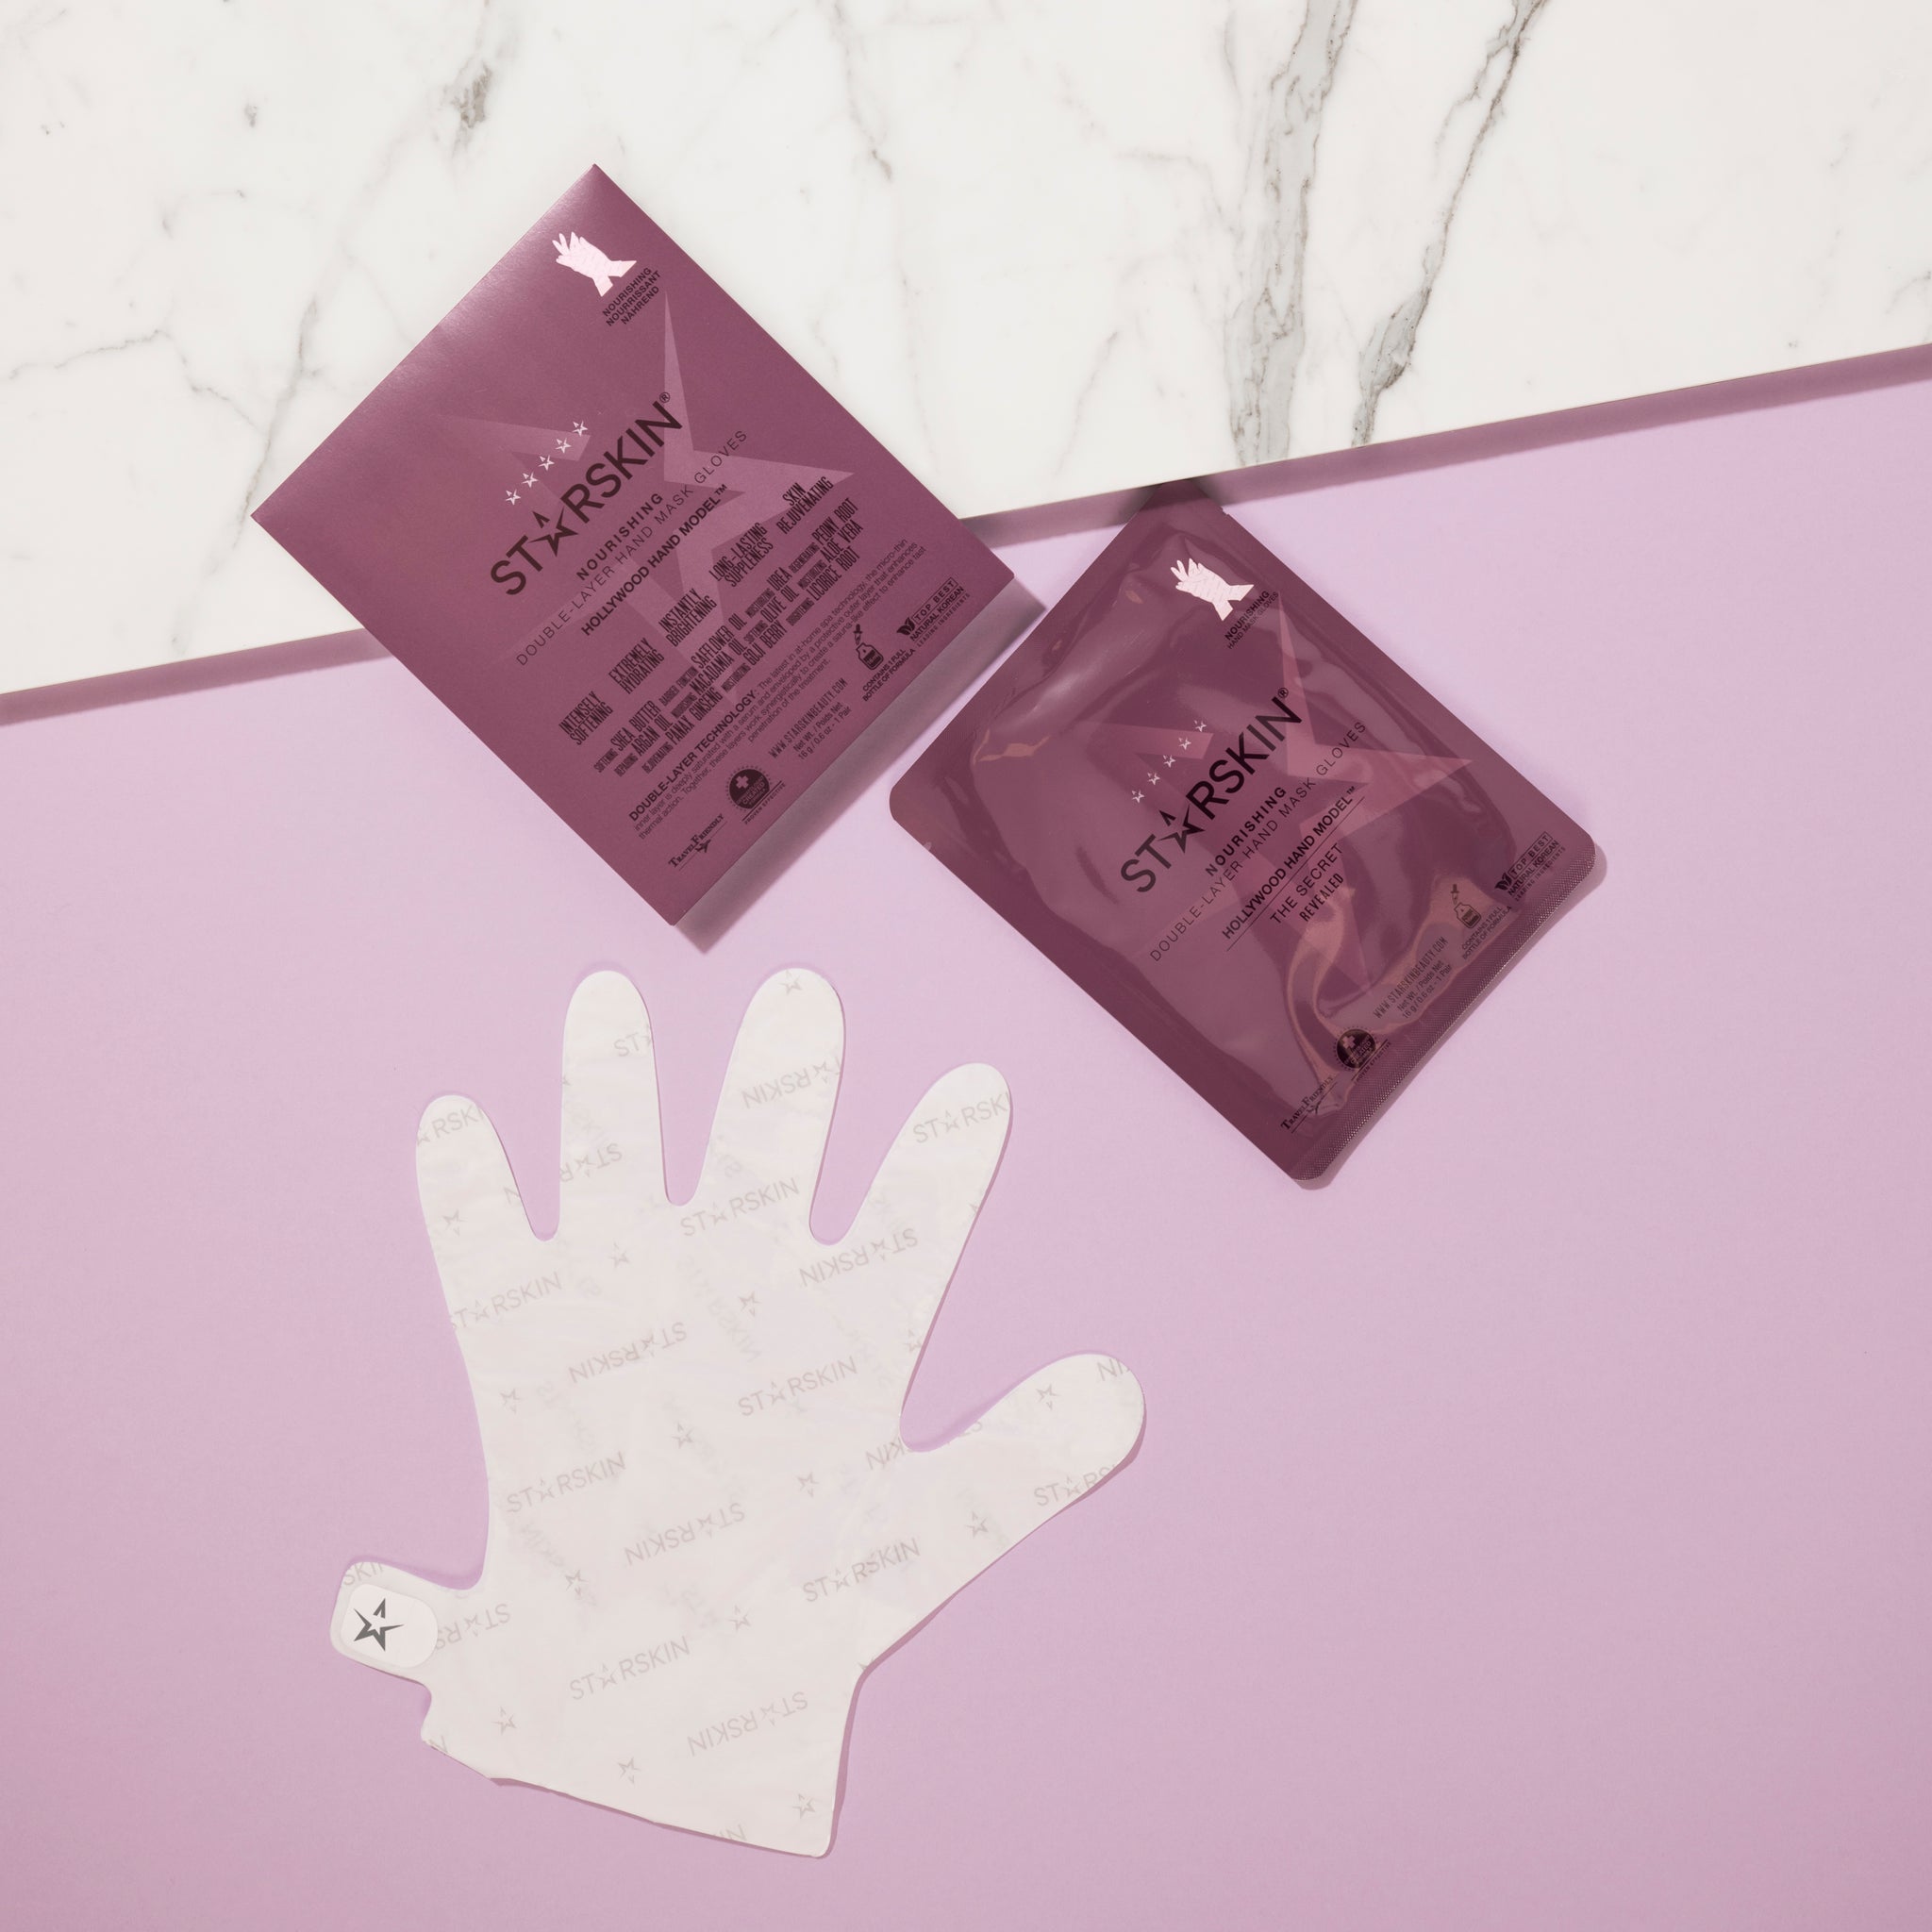 The actual product in the shape of a hand, the sachet of the product and the product packaging are all being displayed on a pink and marble colored background. 